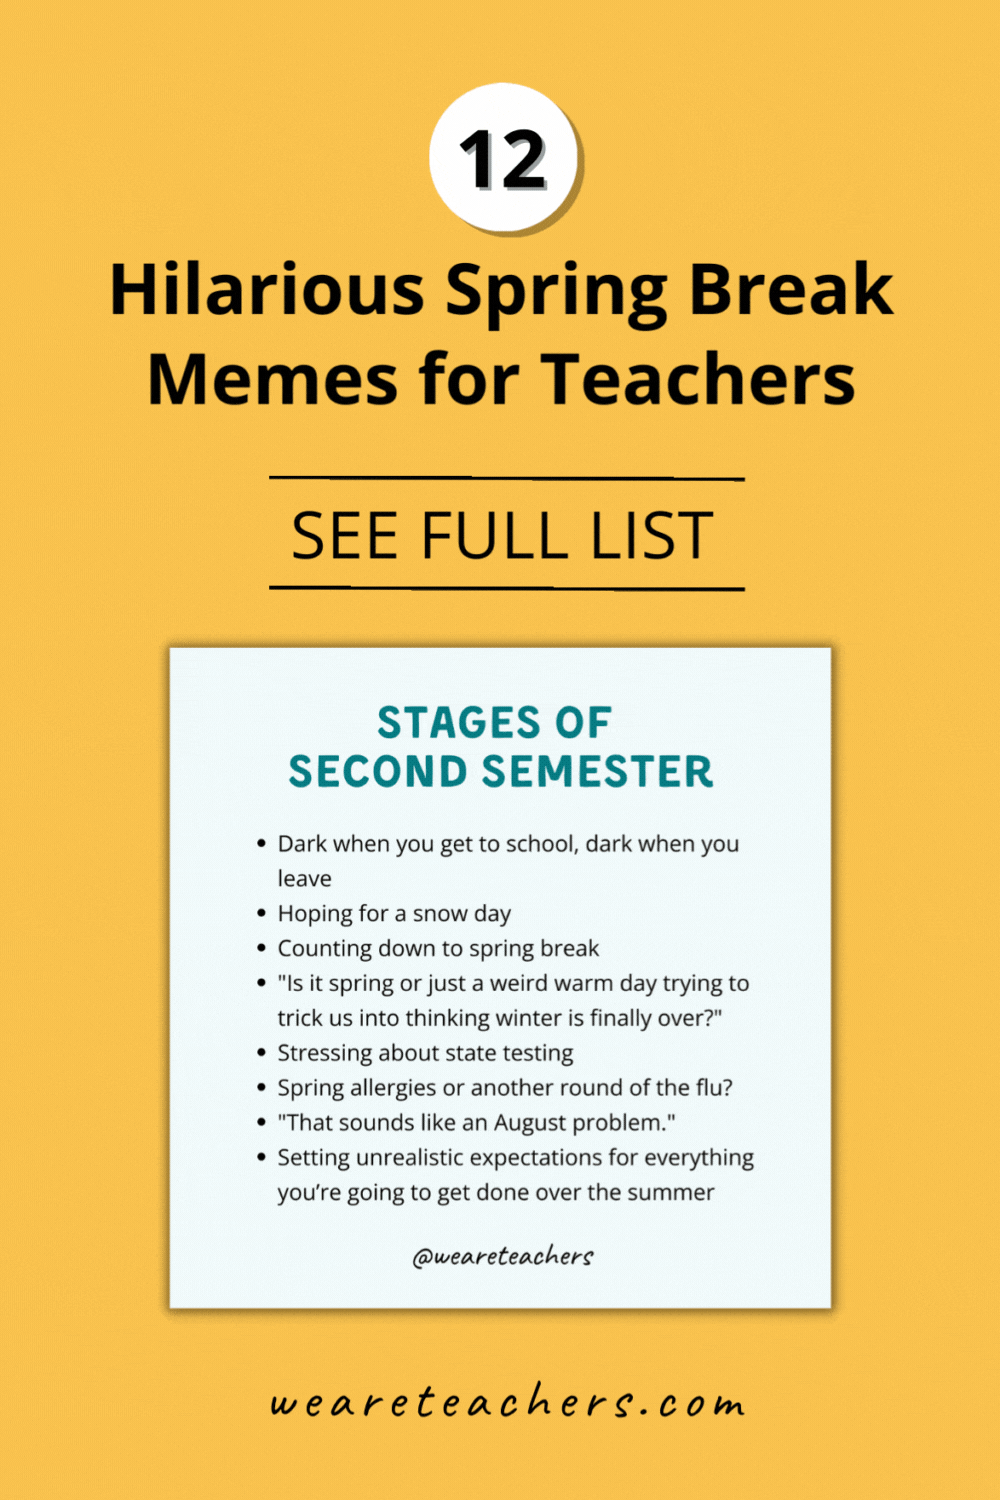 Patiently waiting for spring break to begin? Take a scroll through these hilarious spring break memes for teachers to help get you through!